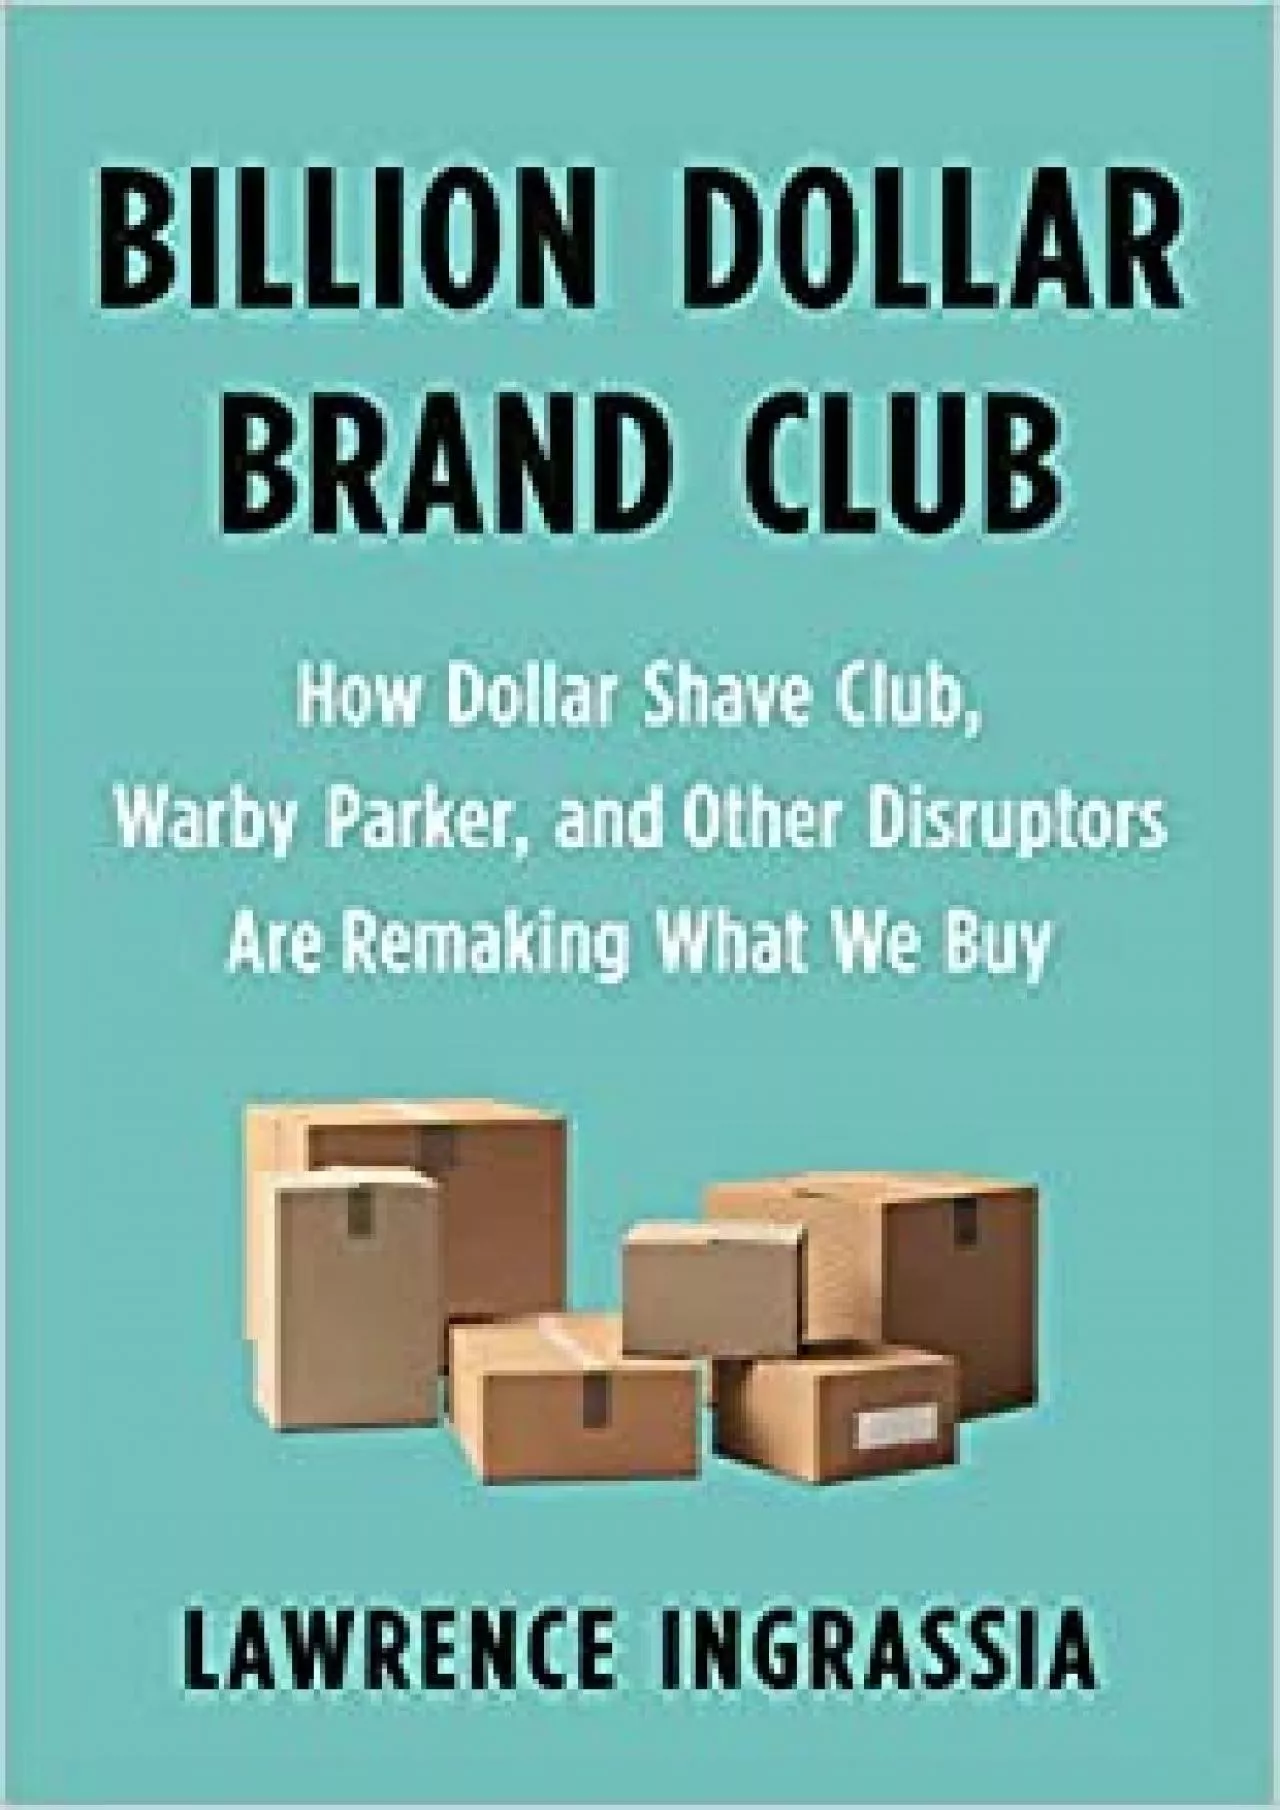 Billion Dollar Brand Club How Dollar Shave Club Warby Parker and Other Disruptors Are